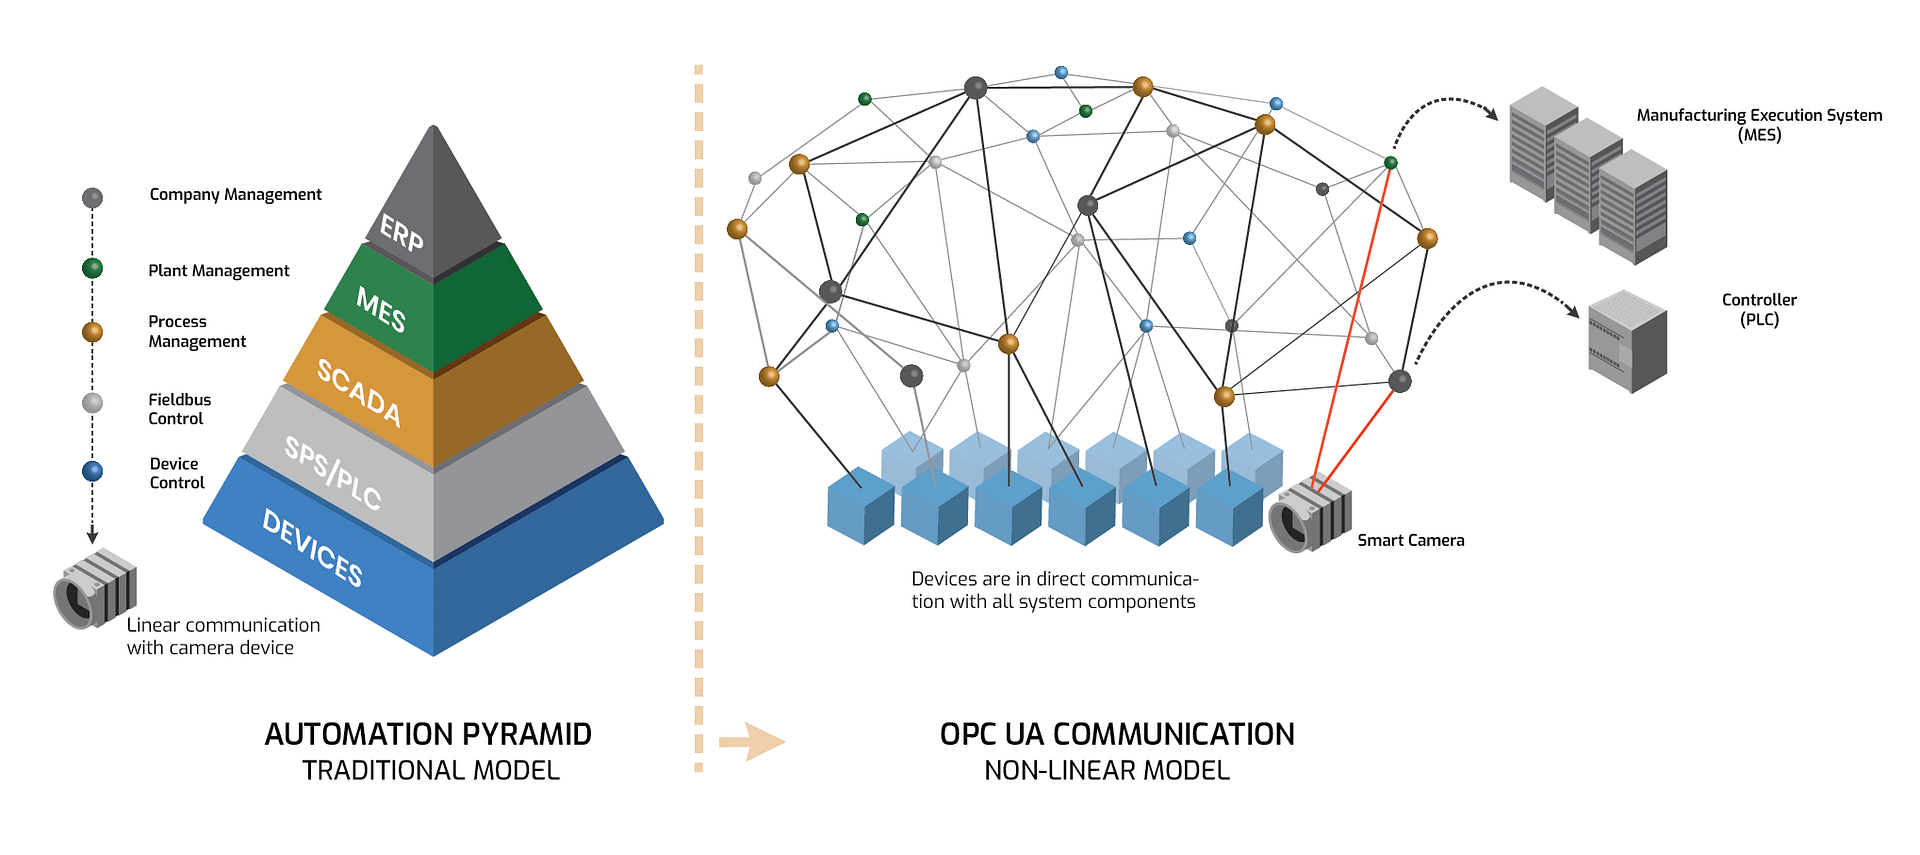 comparing connection ability of CoaXPress, Camera Link and gigE Vision